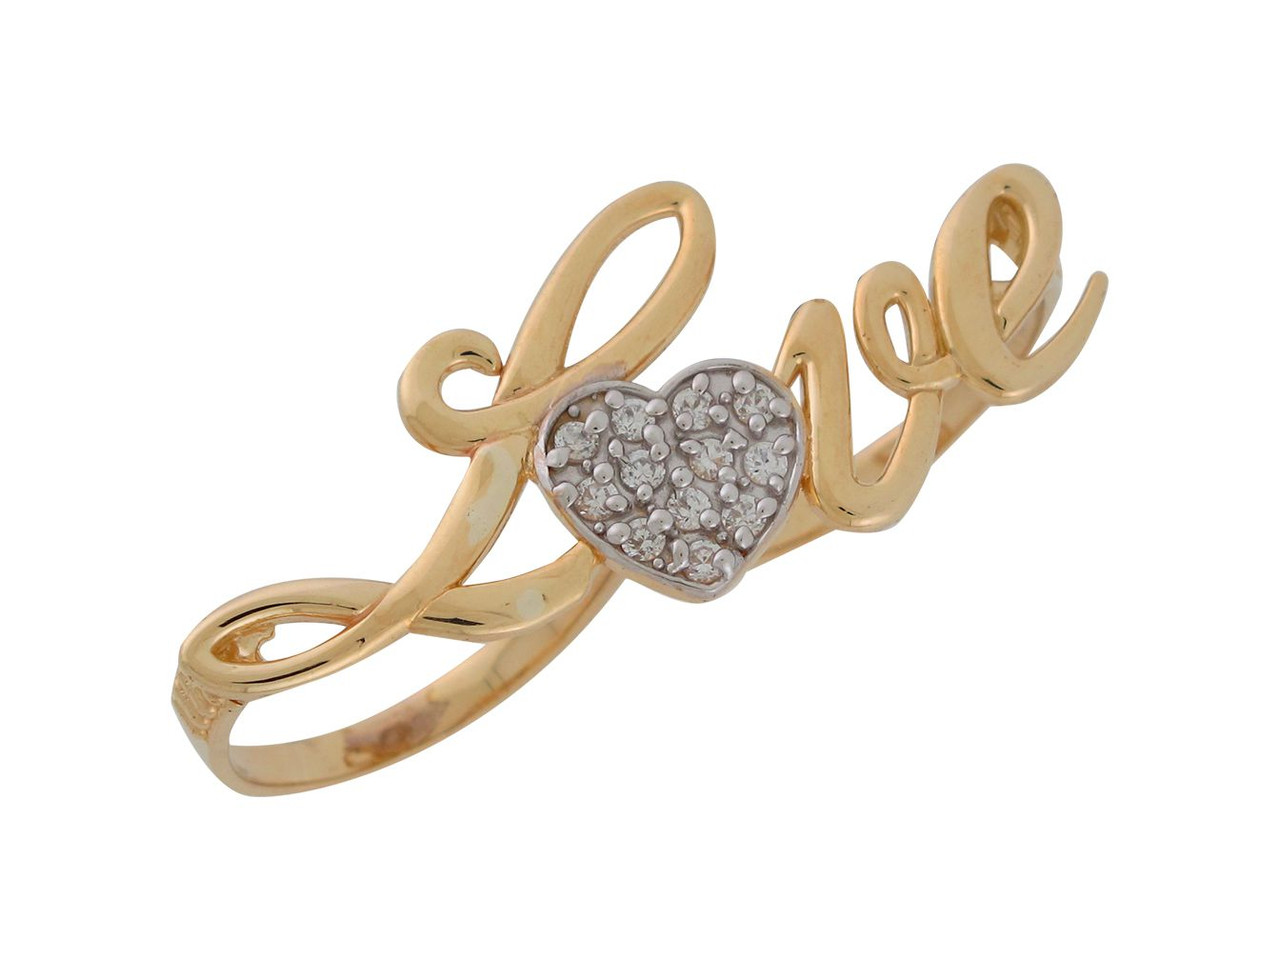 Two-Tone Gold Studded Ladies Liquidation Jewelry R9325) High Love Polish Finger (JL# Ring - Two